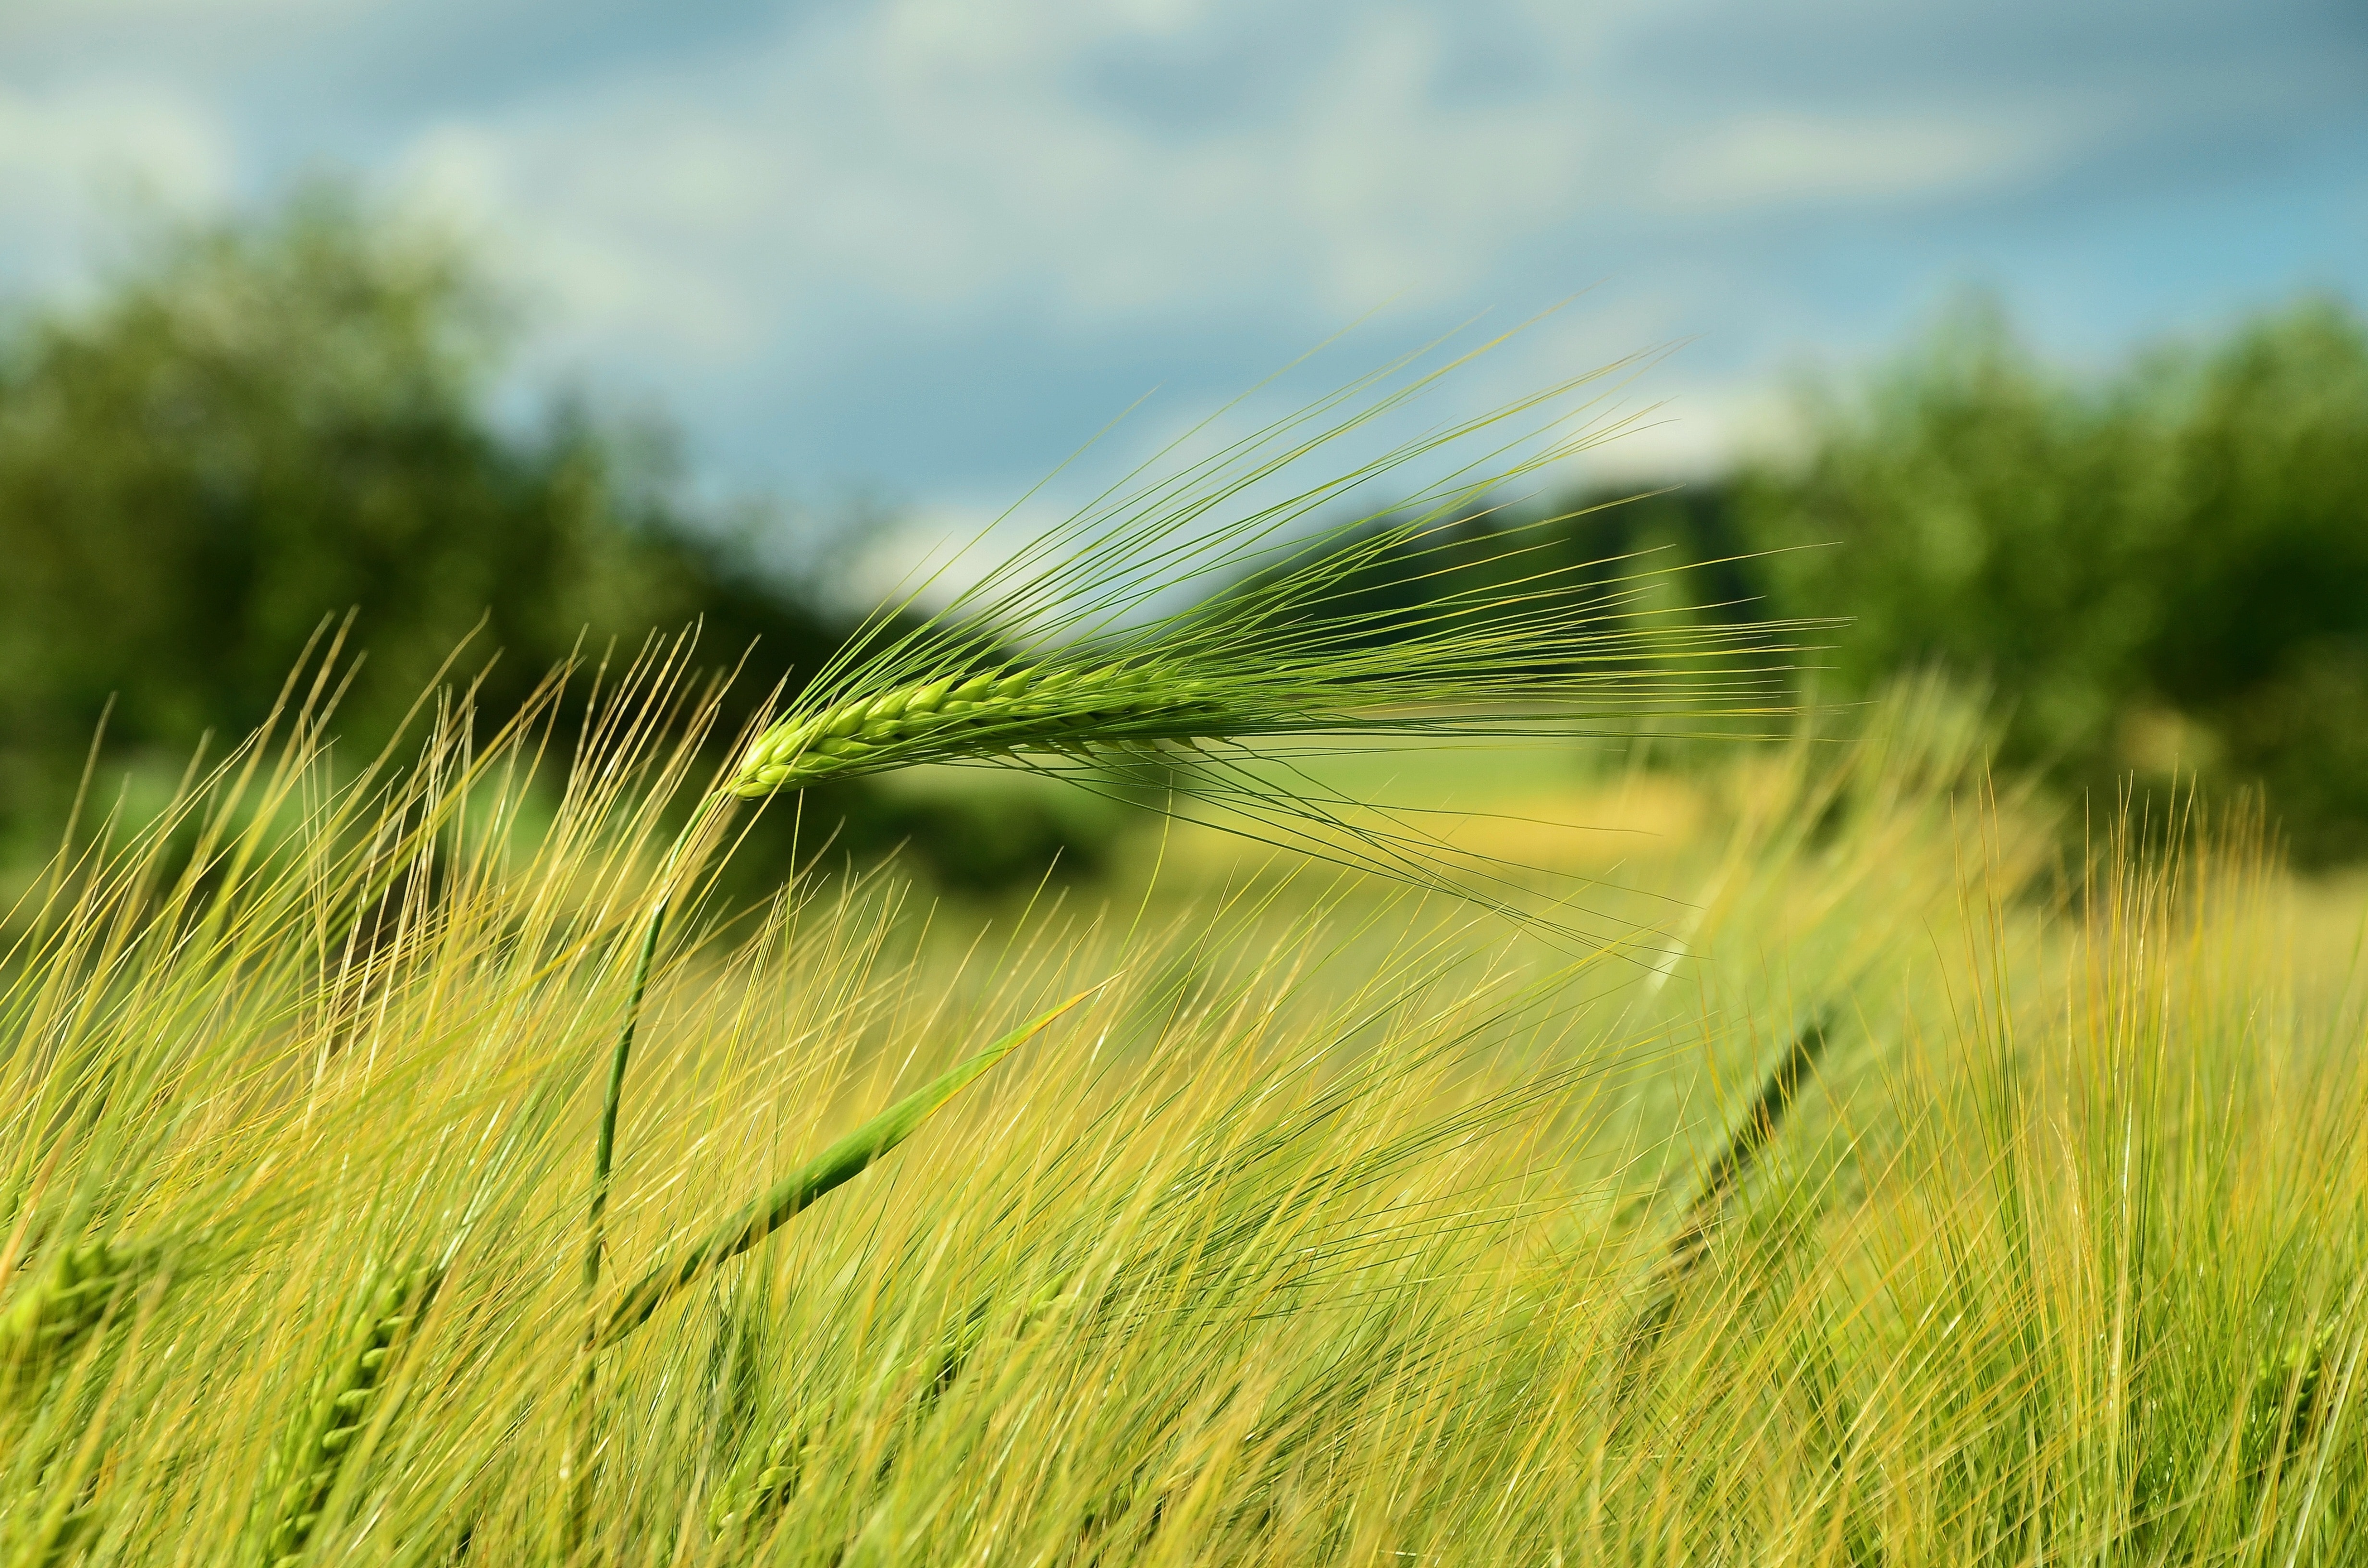 Barley, Spike, Barley Field, Cereals, agriculture, growth